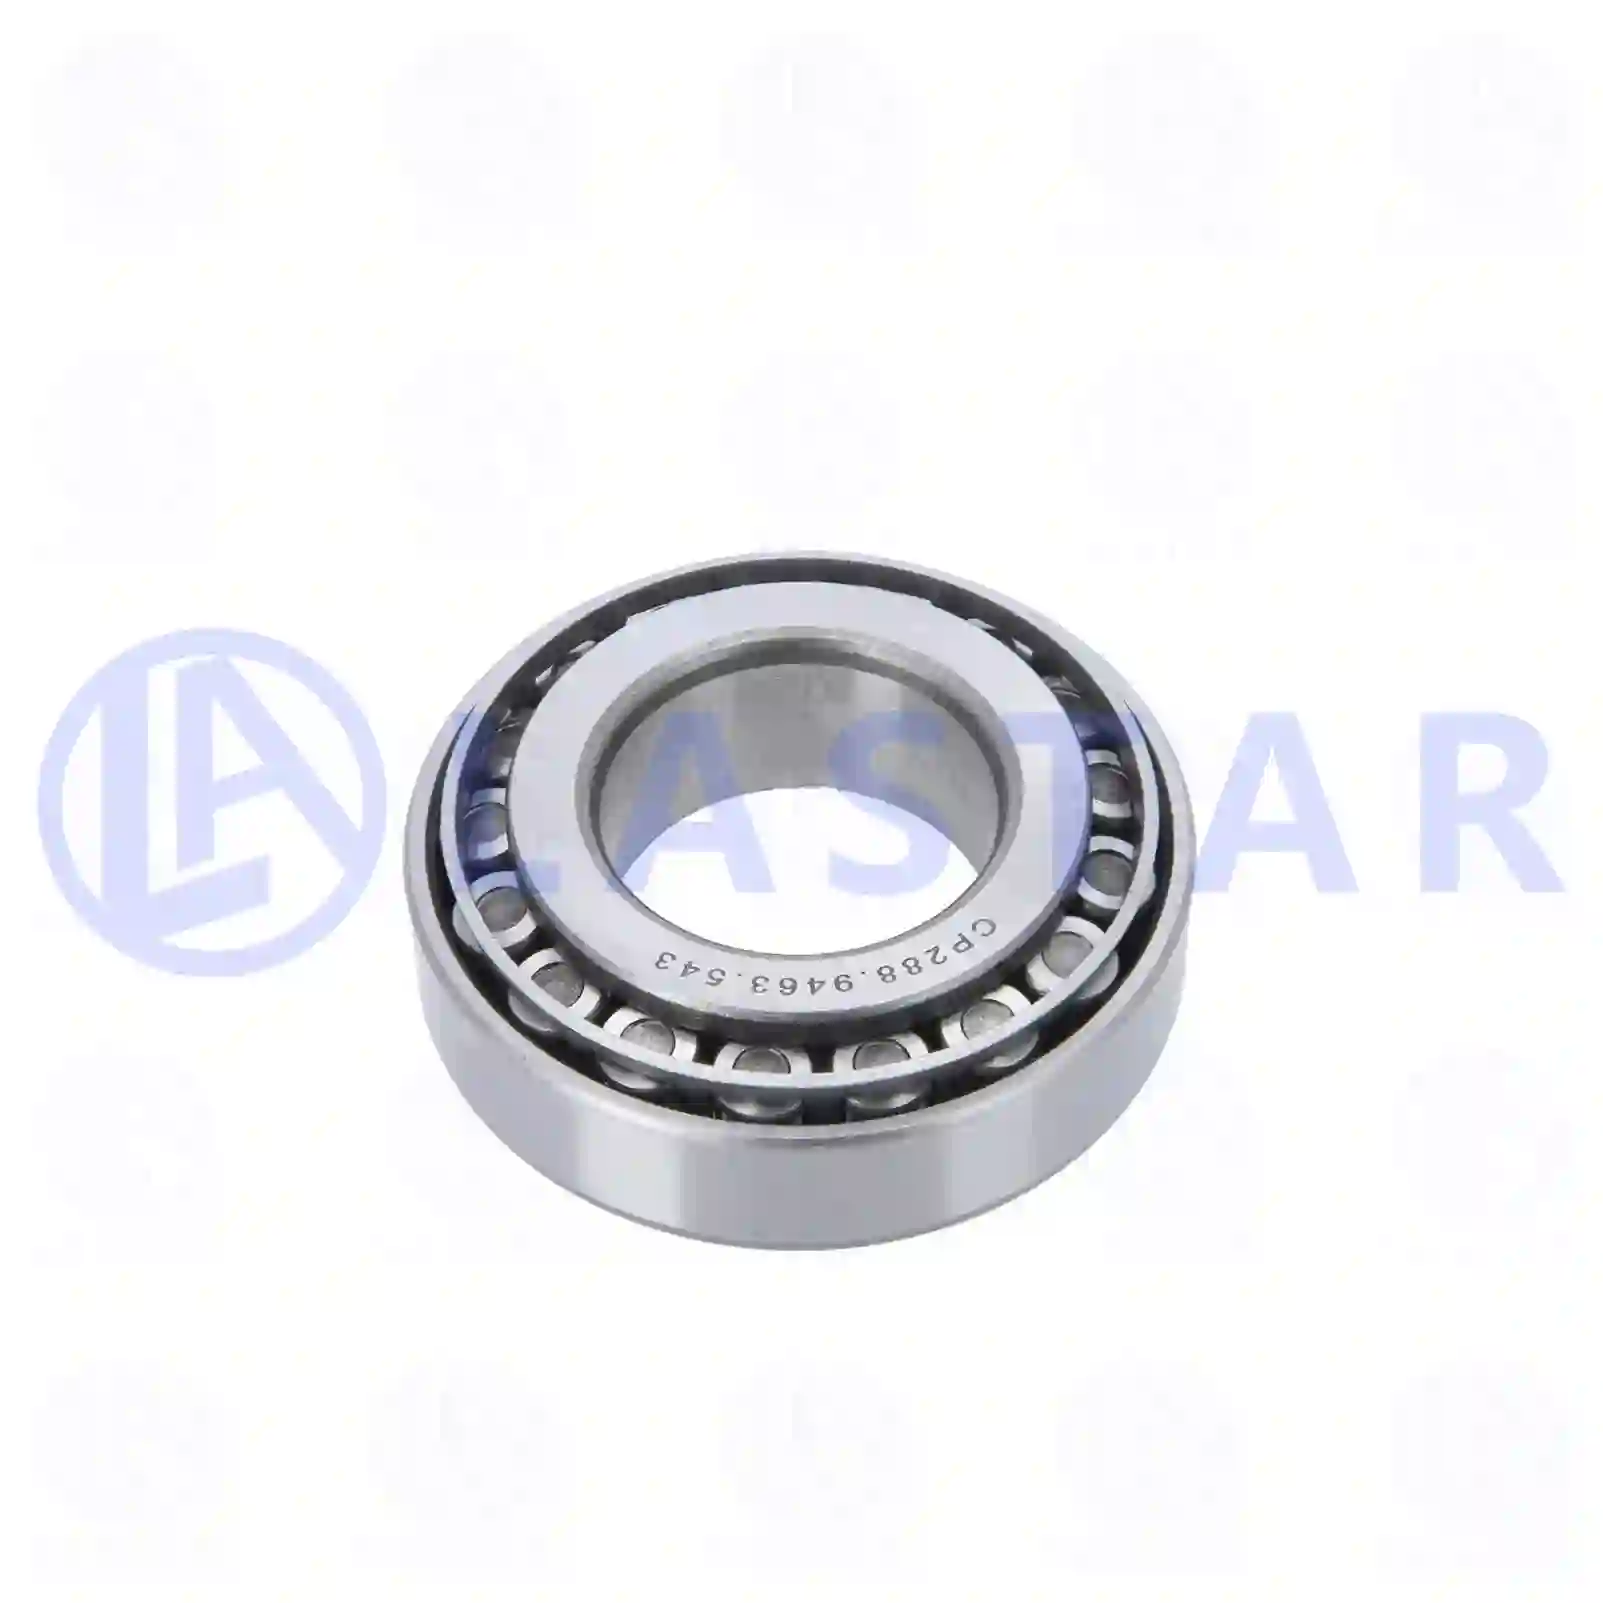 Tapered roller bearing, 77725069, 0014554, 14554, 0001440642X1, 004207725000, 005090157, 1440642X1, 4207725, TK4207725000, 01110002, 26800140, 10500474, 710500474, 8-94248078-0, 01110002, 07164502, 08560451, 08850841, 26800140, 3612944000, 503644293, 60144280, 93804619, 93806251, 823632208, 06324890080, 06324990062, 06324990063, 81934200055, 81934200246, 0039813805, 0039819405, 0159813405, 0159813805, 0159815605, 0169813505, 0169817205, MB025005, 40210-76000, 40210-9X60A, 0023432208, 0773220800, 0959232208, 5516014042, 5516014518, 5516014554, 214104, 183763, 7011093 ||  77725069 Lastar Spare Part | Truck Spare Parts, Auotomotive Spare Parts Tapered roller bearing, 77725069, 0014554, 14554, 0001440642X1, 004207725000, 005090157, 1440642X1, 4207725, TK4207725000, 01110002, 26800140, 10500474, 710500474, 8-94248078-0, 01110002, 07164502, 08560451, 08850841, 26800140, 3612944000, 503644293, 60144280, 93804619, 93806251, 823632208, 06324890080, 06324990062, 06324990063, 81934200055, 81934200246, 0039813805, 0039819405, 0159813405, 0159813805, 0159815605, 0169813505, 0169817205, MB025005, 40210-76000, 40210-9X60A, 0023432208, 0773220800, 0959232208, 5516014042, 5516014518, 5516014554, 214104, 183763, 7011093 ||  77725069 Lastar Spare Part | Truck Spare Parts, Auotomotive Spare Parts